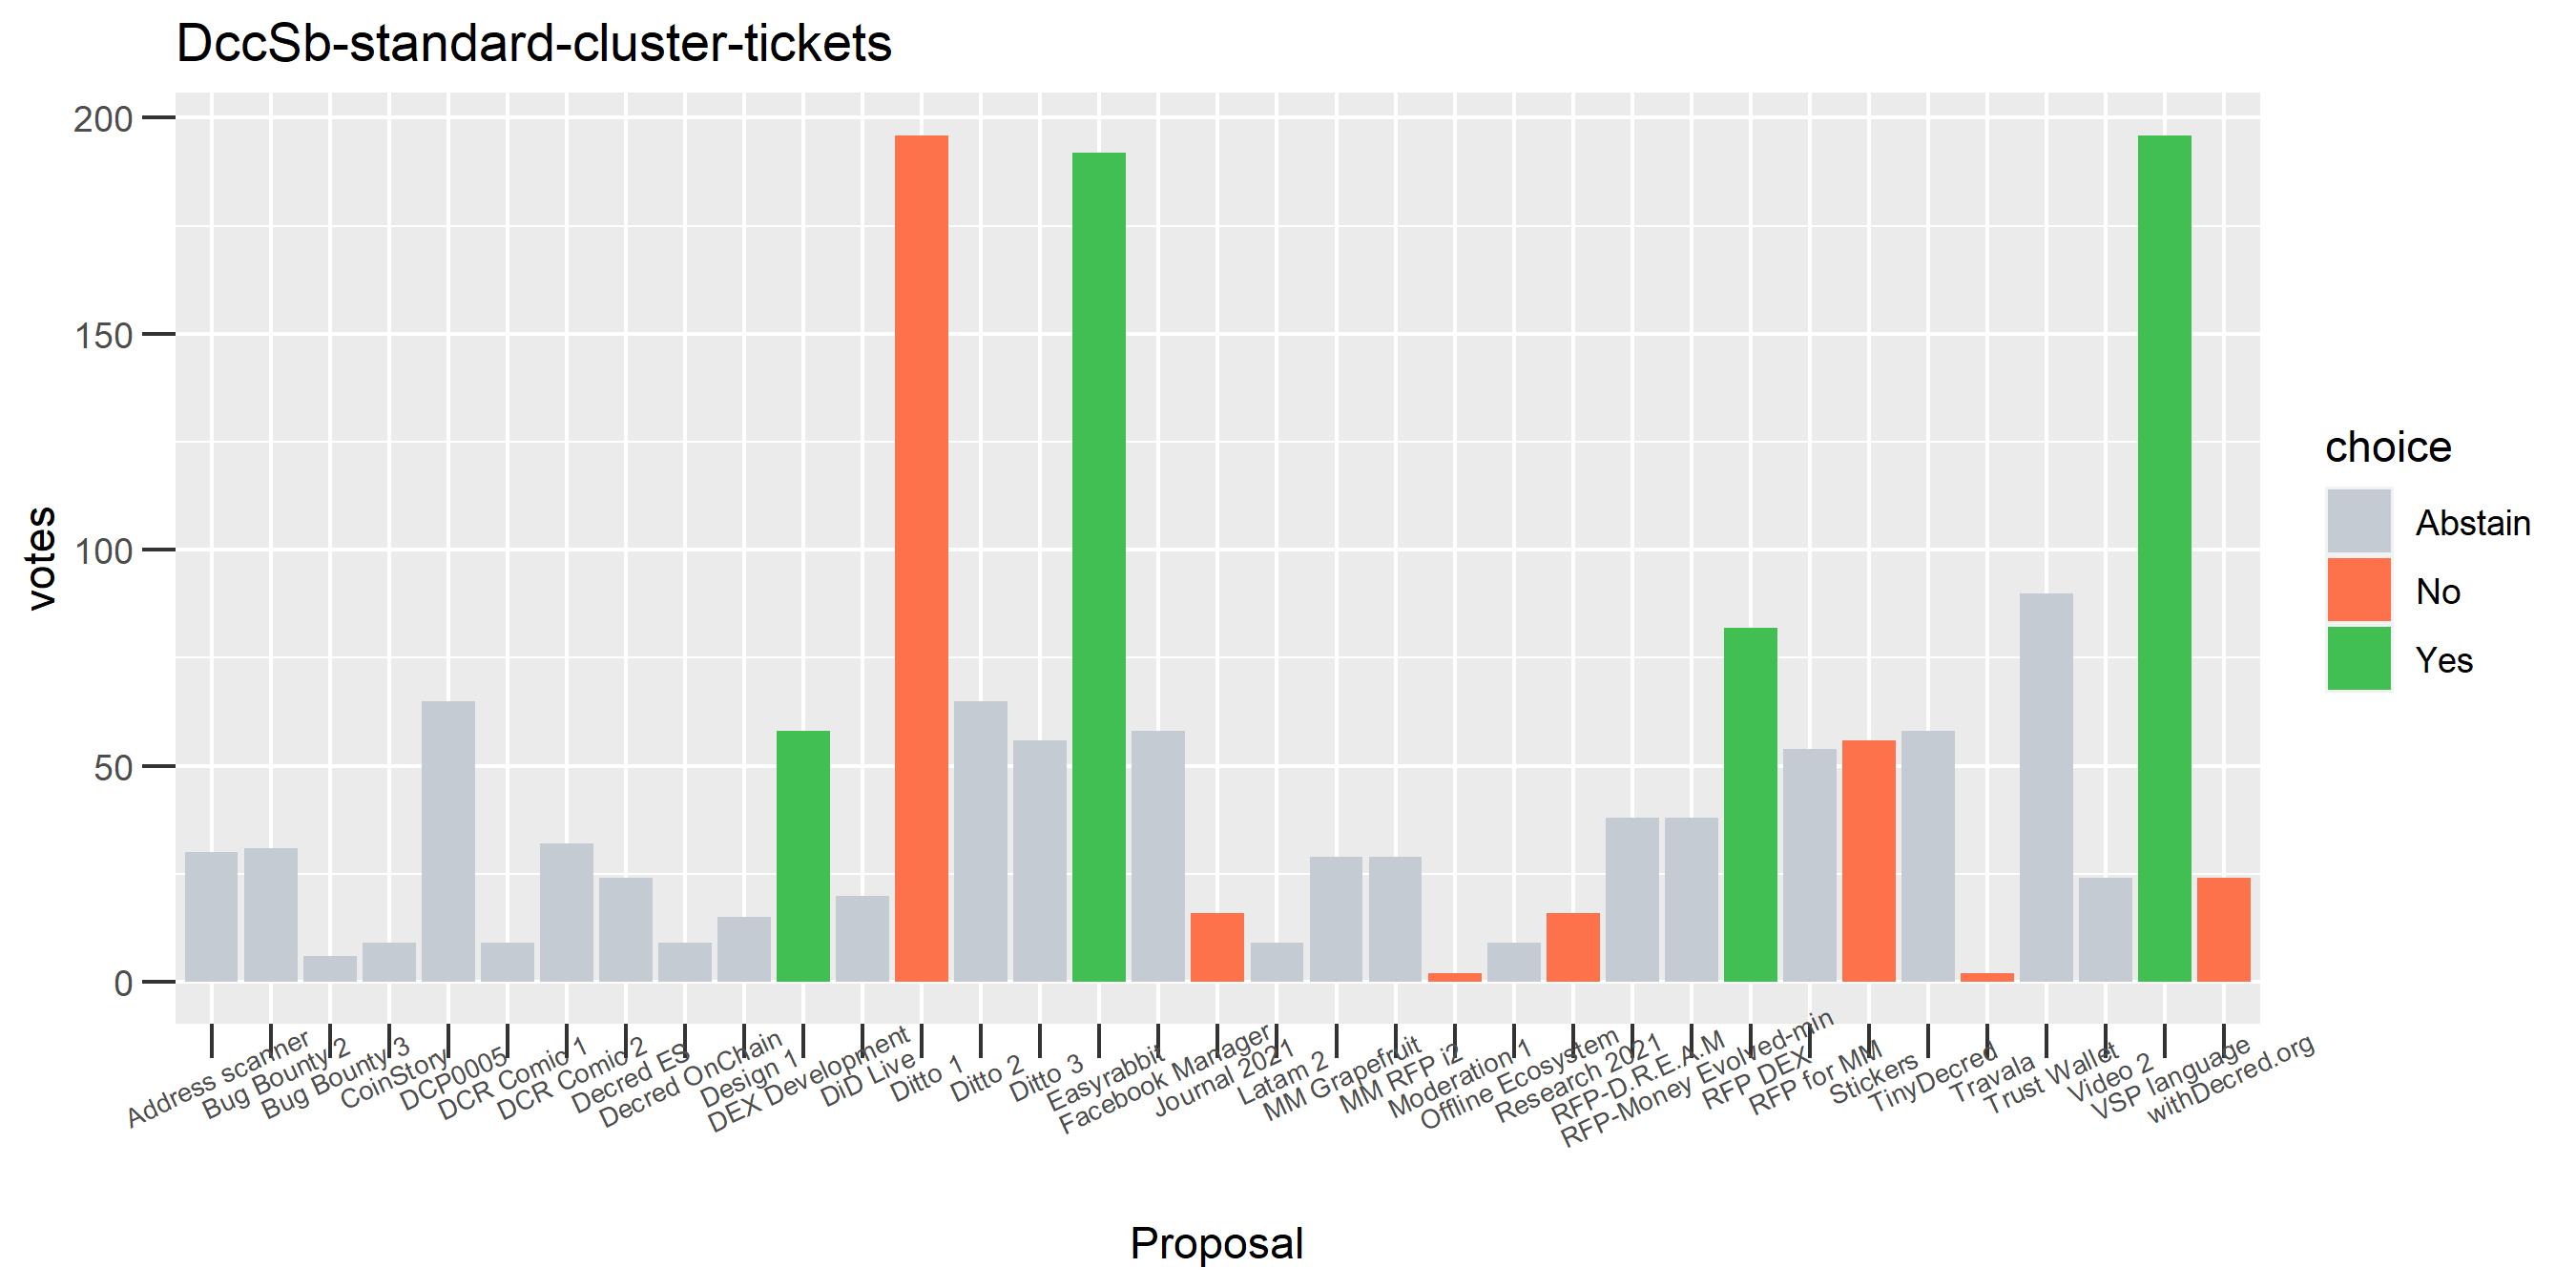 DccSb-standard-cluster-tickets